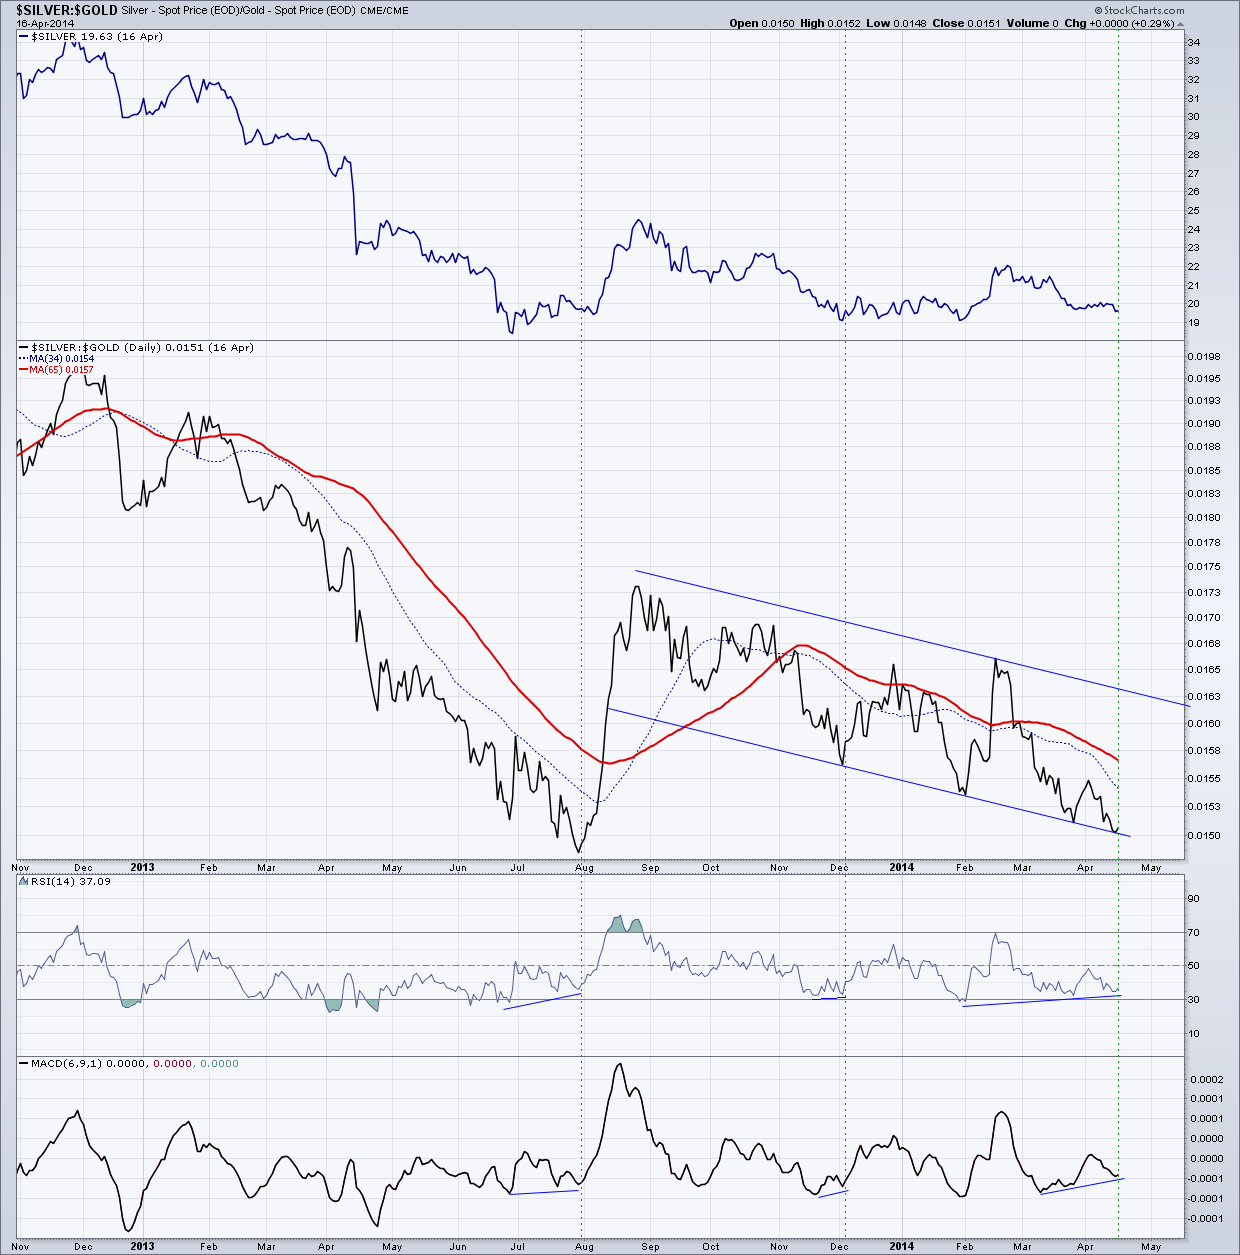 Silver/Gold ratio - Daily